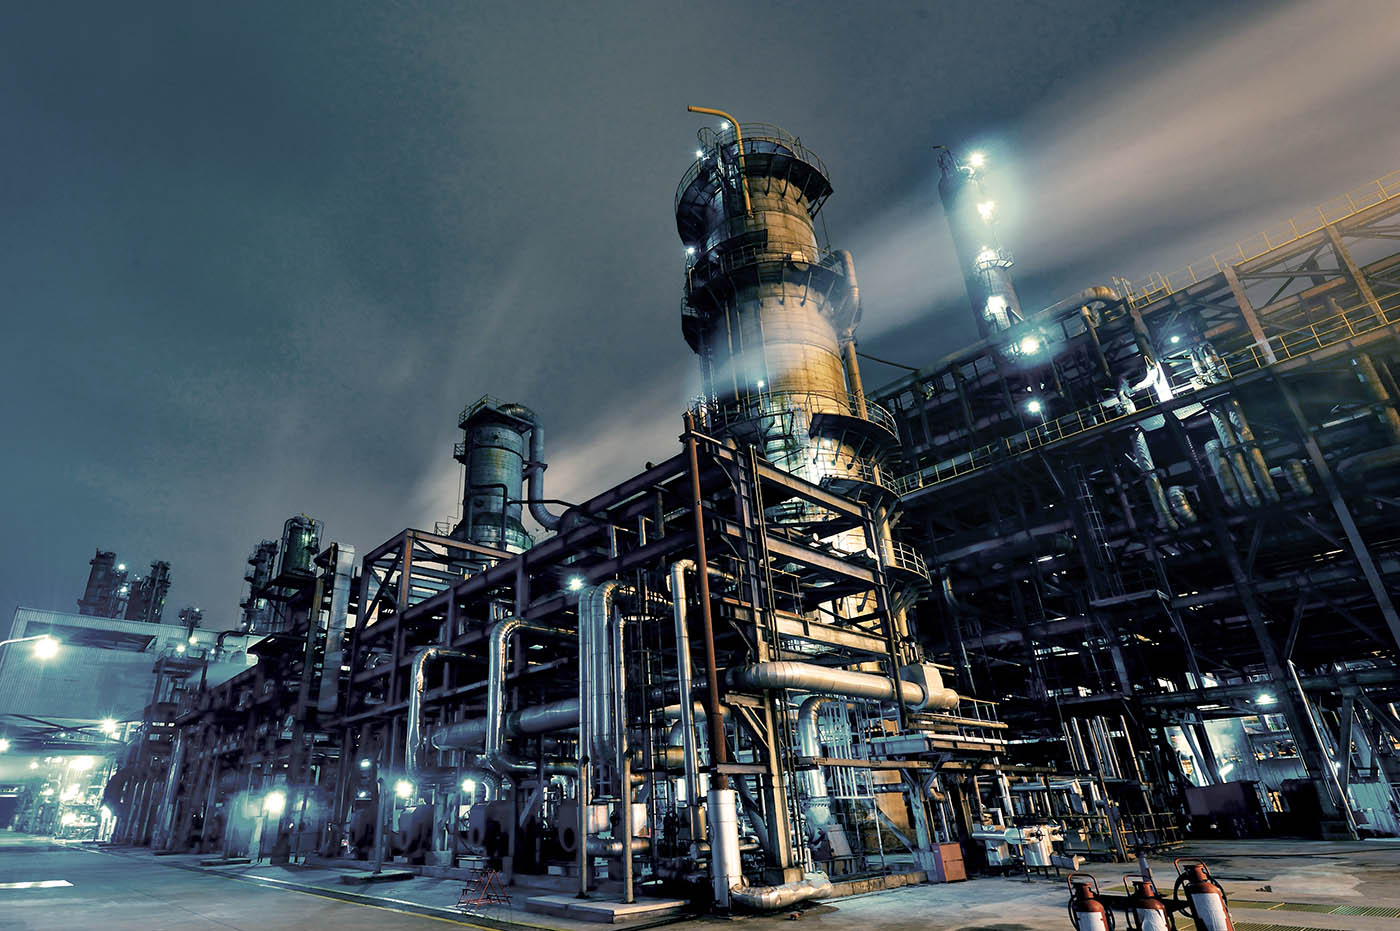 Energy and oil plant at night.